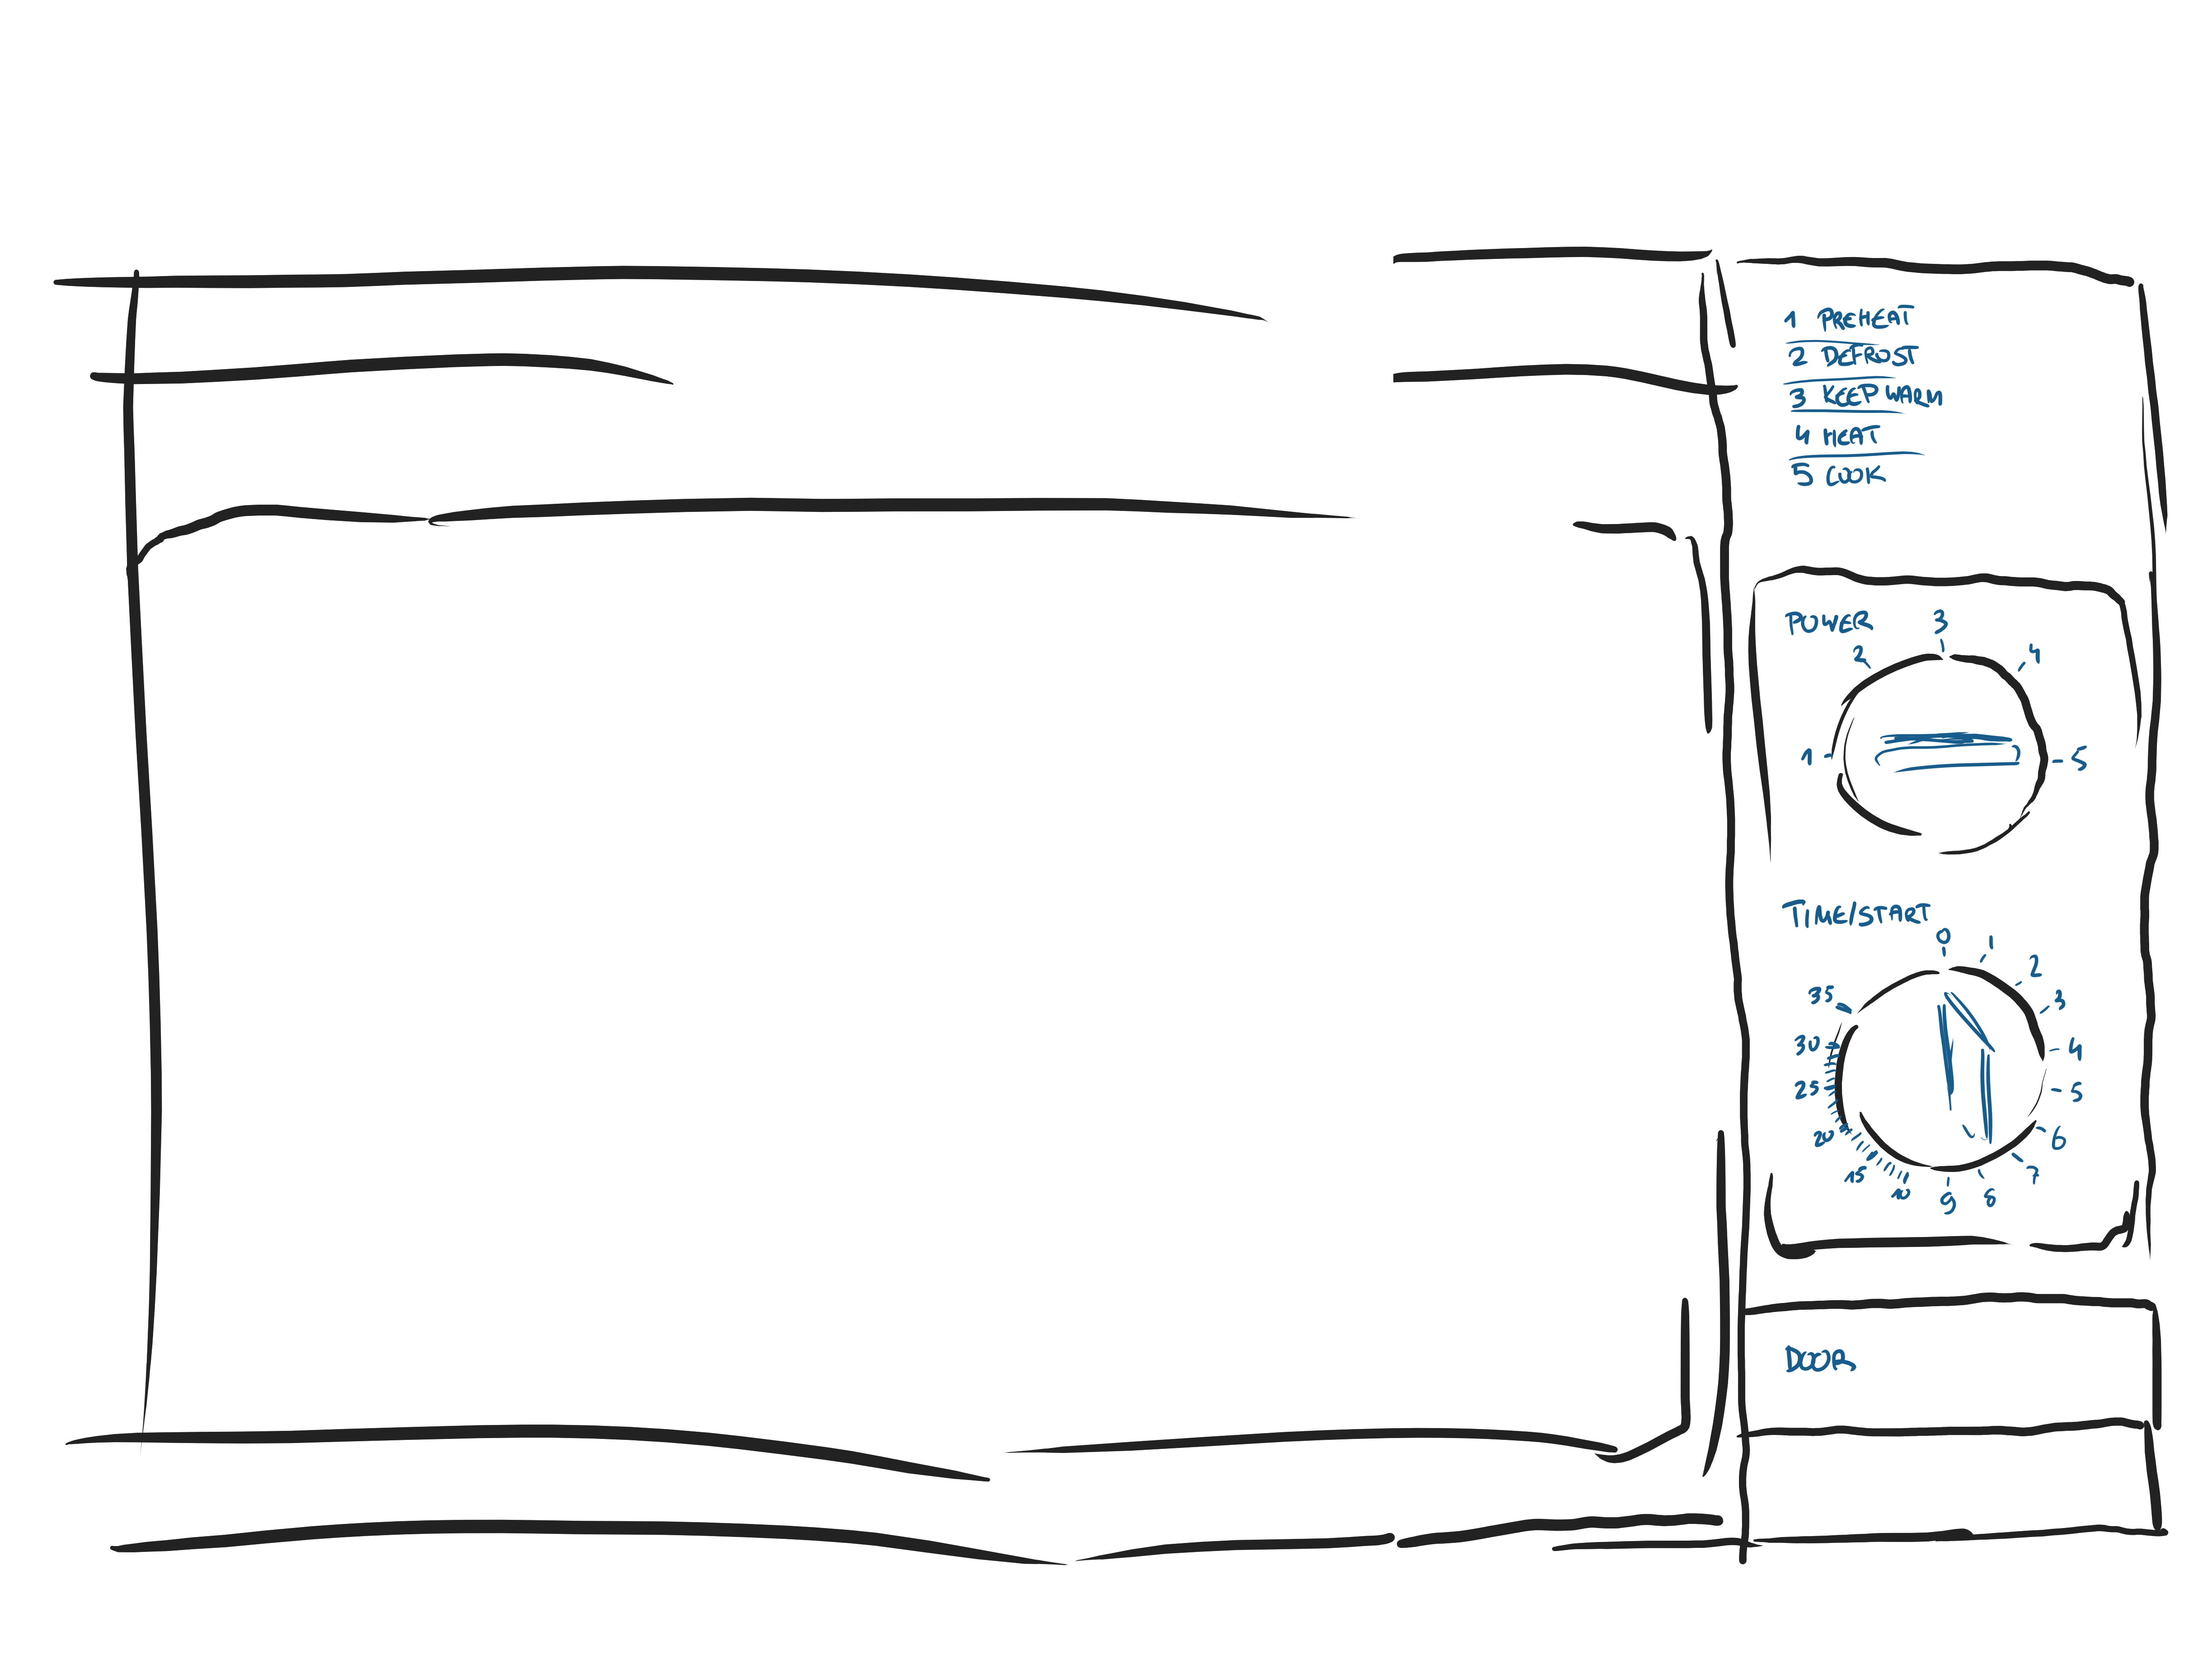 Sketch of the microwave oven with English labels: The power dial is labeled from one to five, with an explanatory grid further above: 1 - Preheat, 2 - Defrost, 3 - Keep Warm, 4 - Heat, 5 - Cook. The second dial is labeled 'Time/Start' and the last element is a big mechanical button labeled 'Door'.